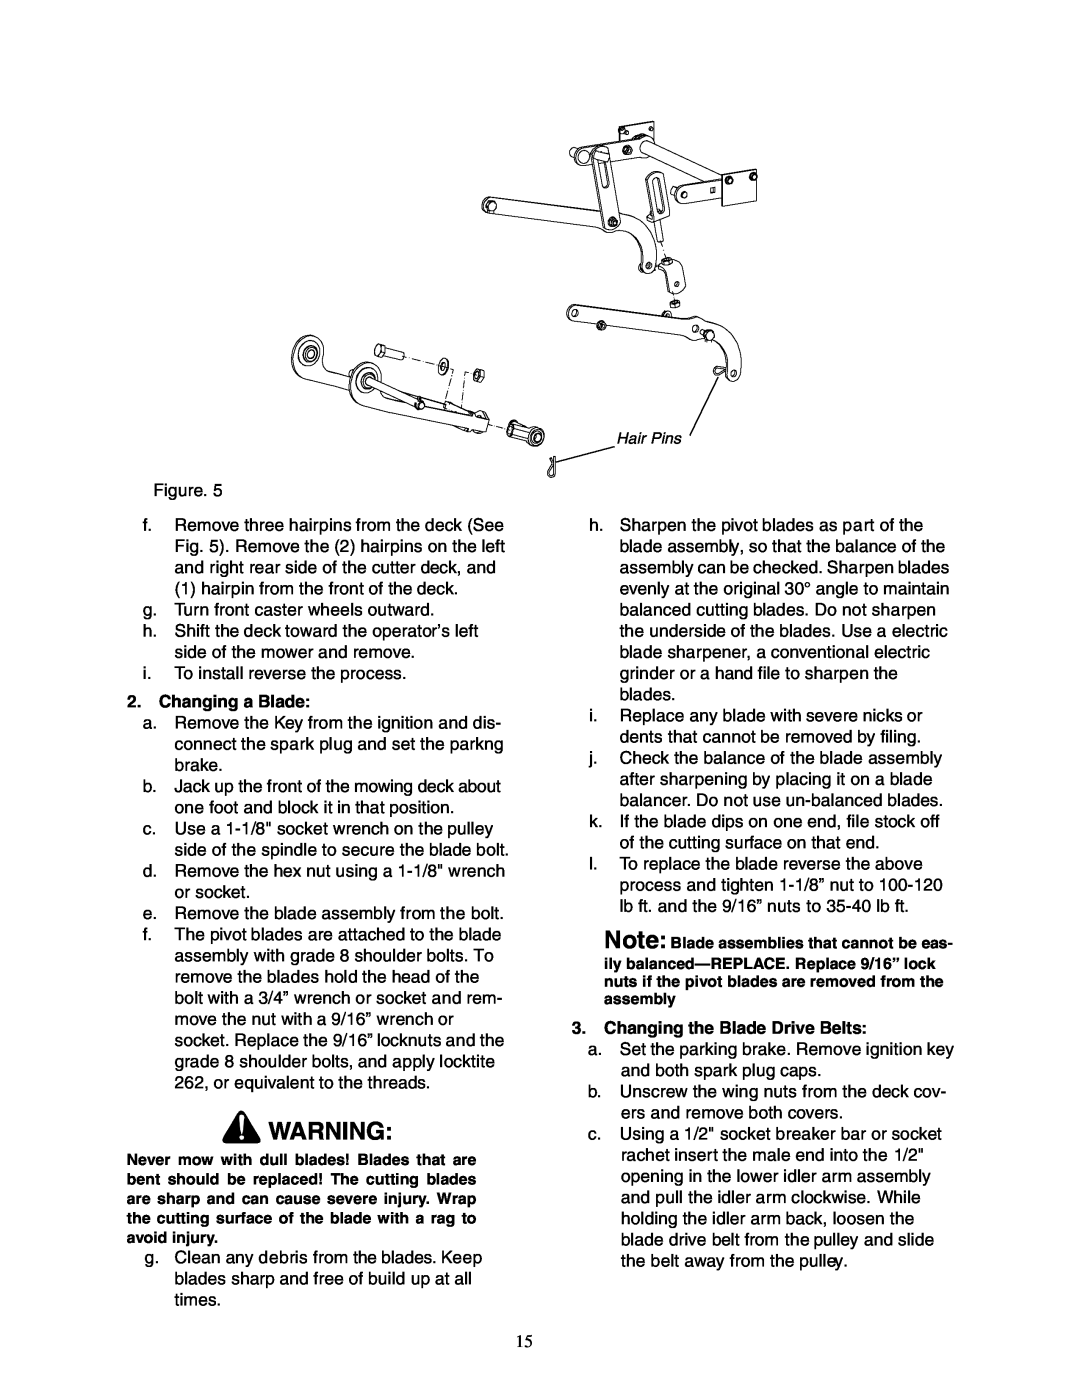 Cub Cadet Z - Wing 48 service manual Changing a Blade, Changing the Blade Drive Belts 